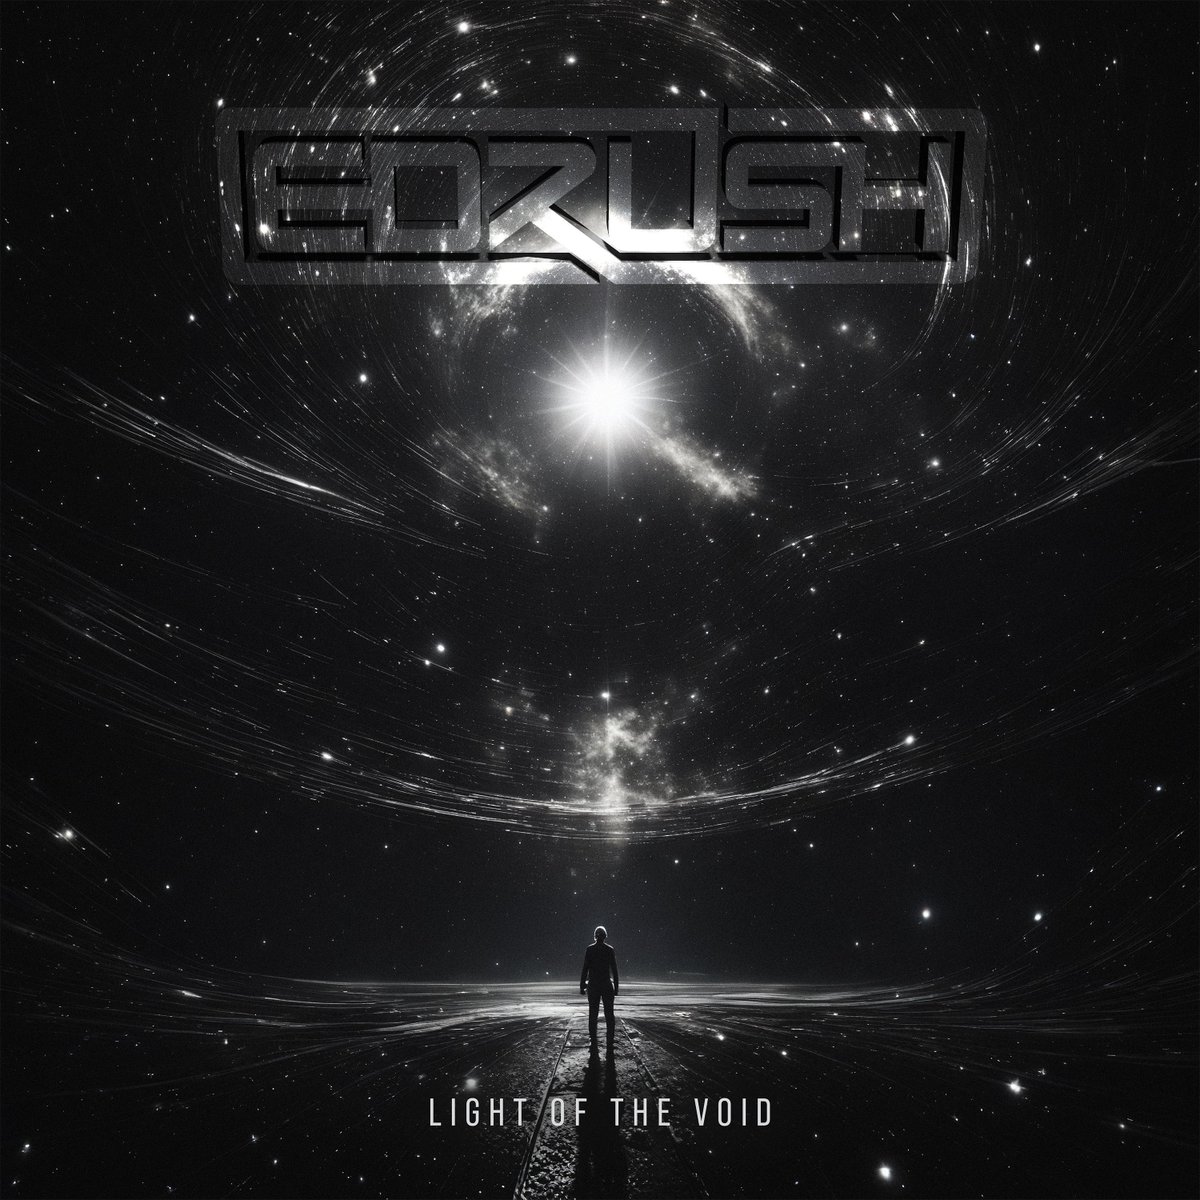 Today marks a big moment in the history of the drum and bass scene, as @Ed_Rush released his first ever solo album 'Light Of The Void' A true masterpiece by one of the pioneers of the drum and bass scene. Thank you Ben, it's been a pleasure 🖤 bfan.link/light-of-the-v… #outnow